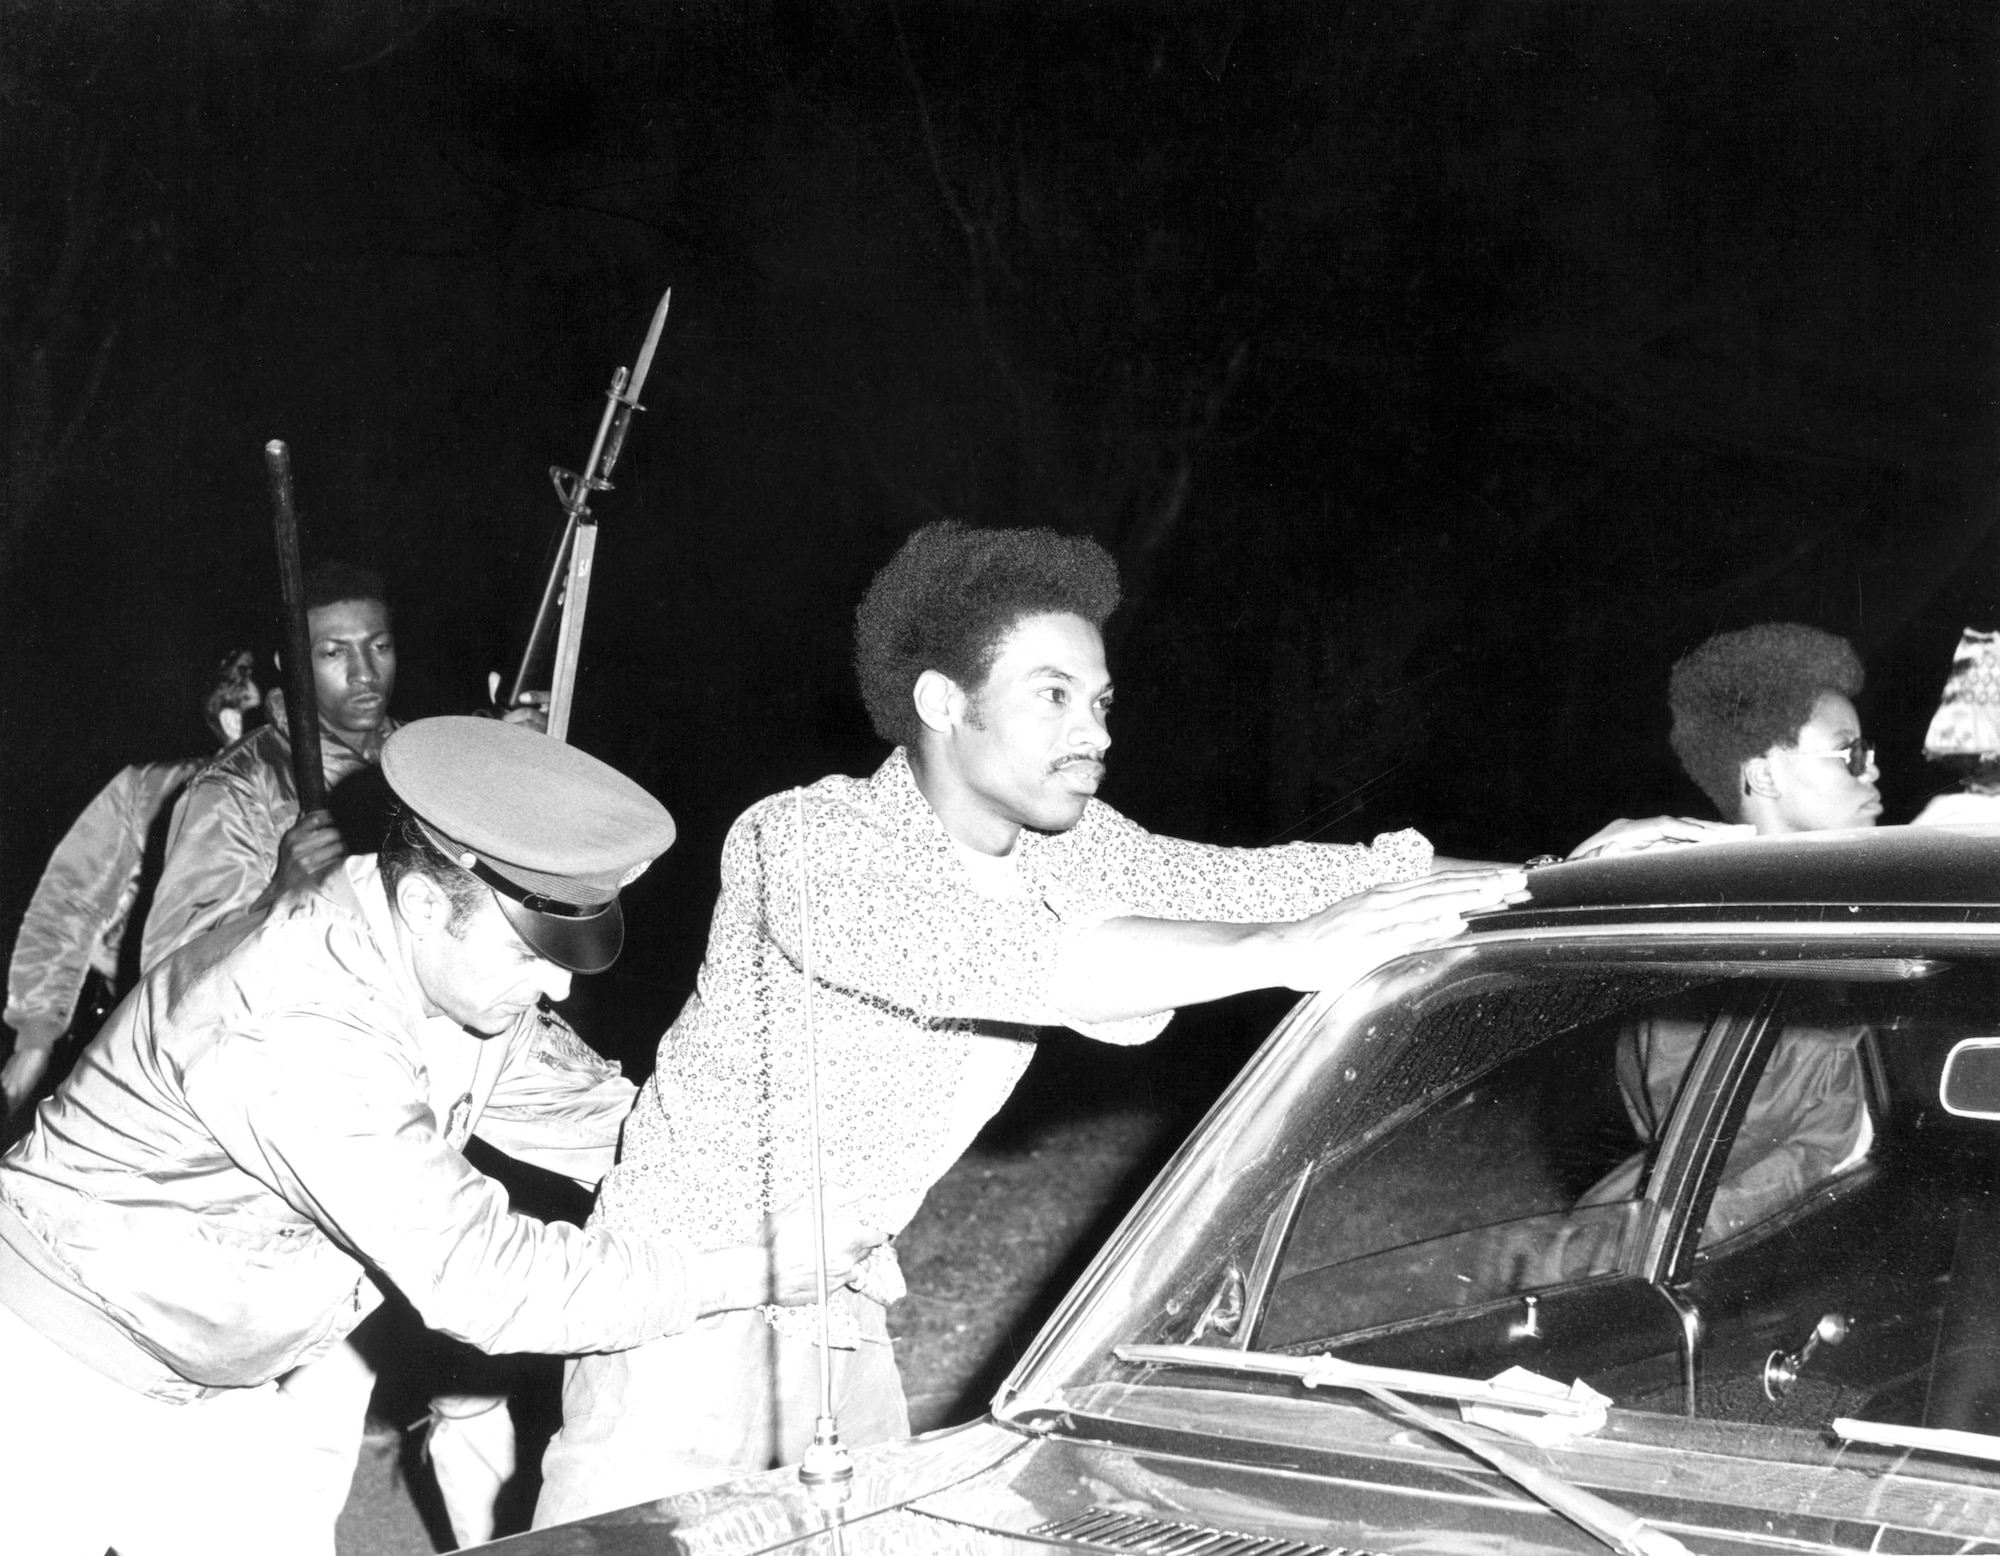 From May 21 to 25, 1971, Travis experienced rioting resulting from tensions in the Airman dormitory area and the Vietnam War. One-hundred and thirty five individuals were arrested, 80 of them detained overnight. The base had to call for police assistance from at least 70 officers from the civilian community. (U.S. Air Force photo)